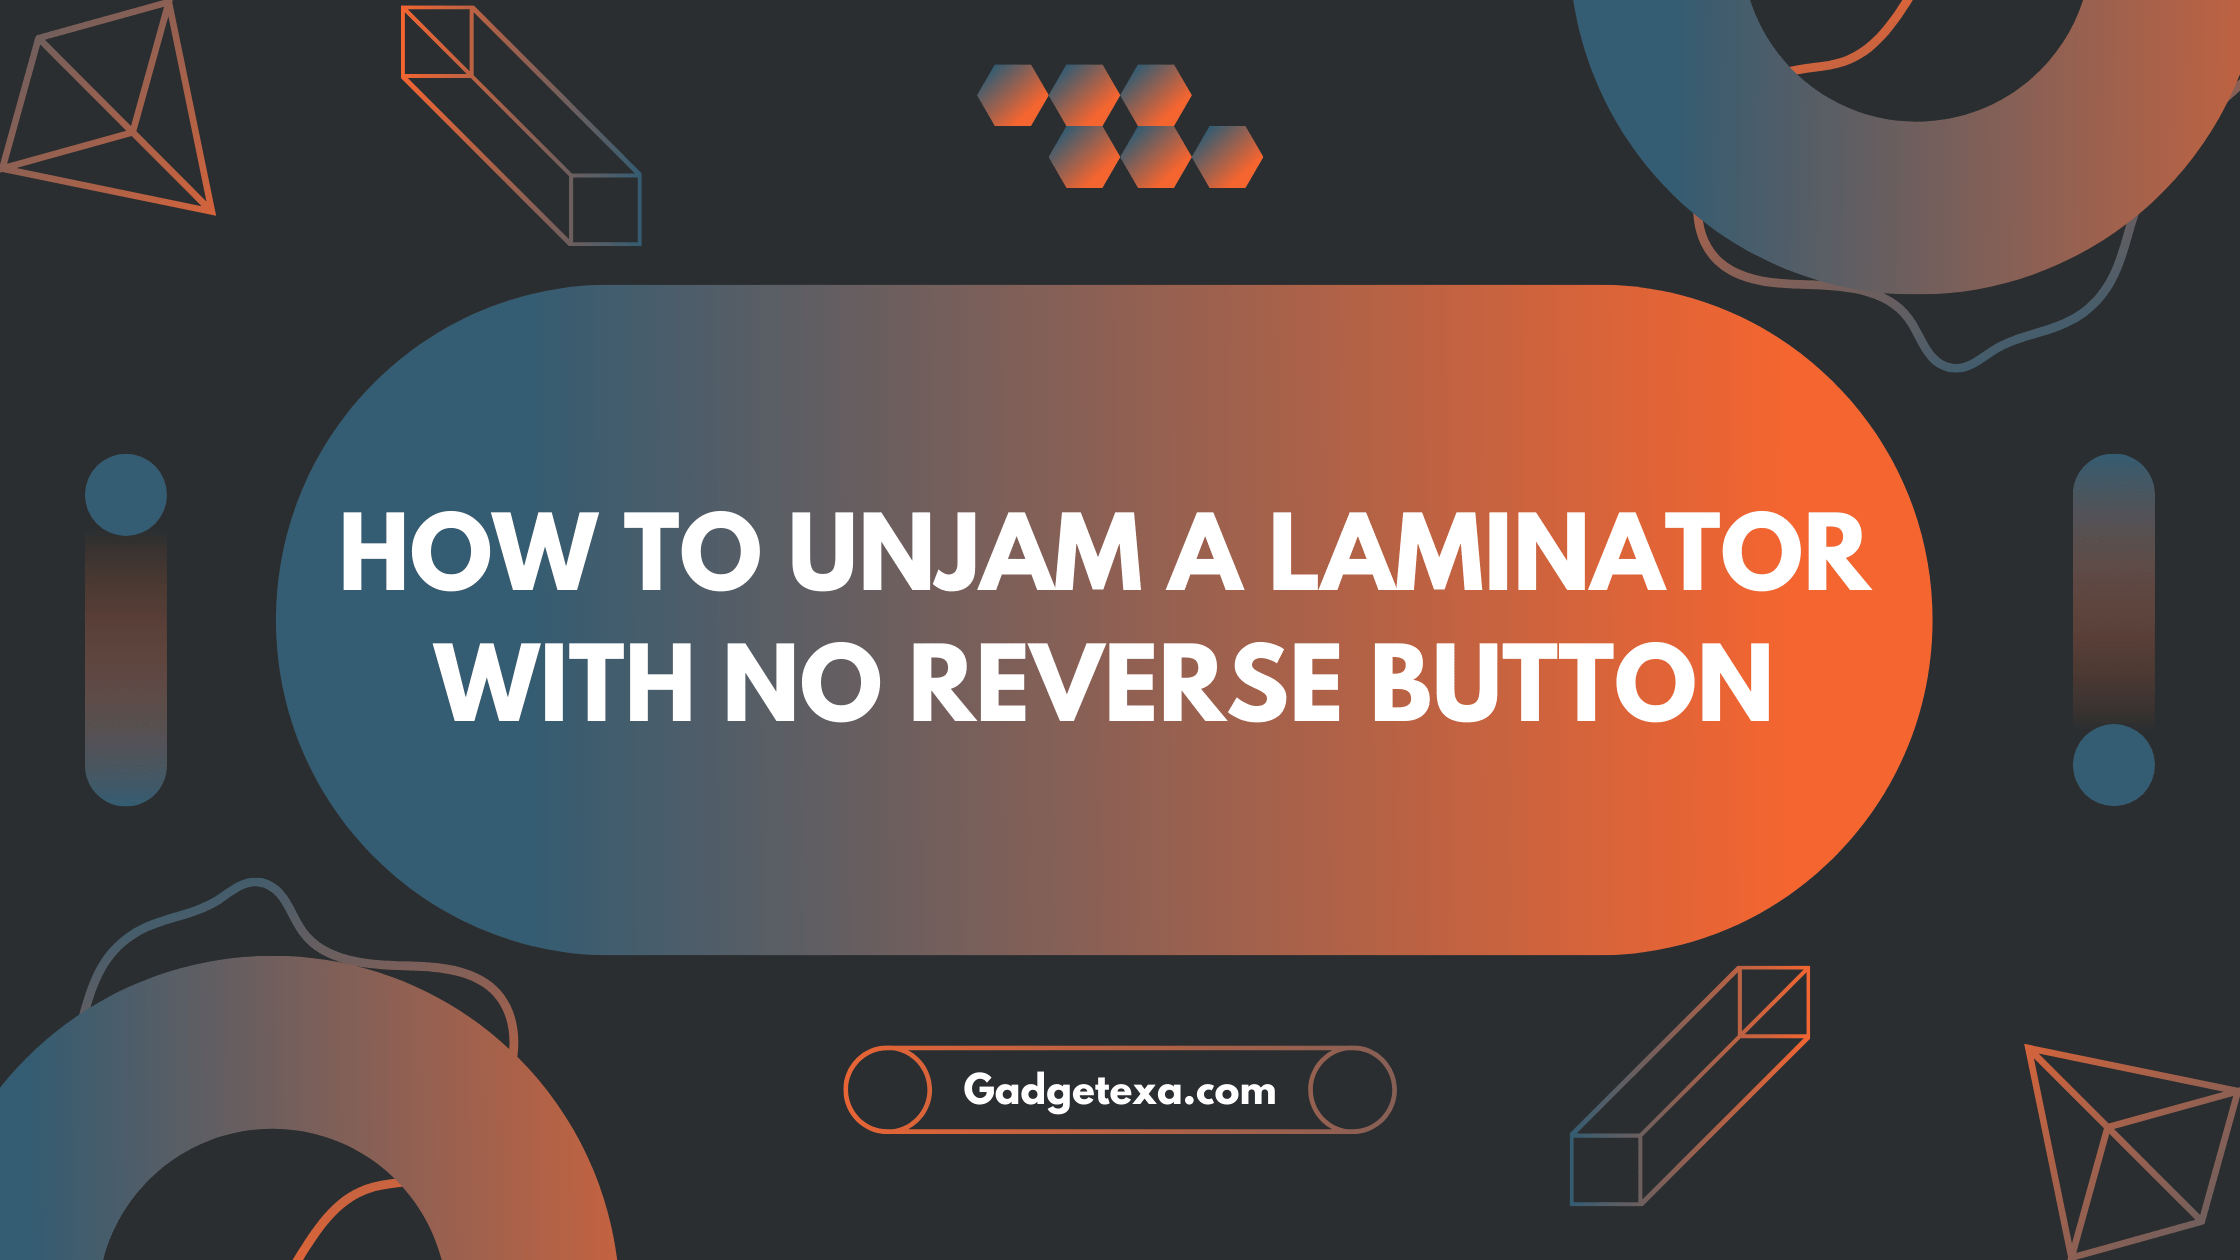 You are currently viewing How to unjam a laminator with no reverse button